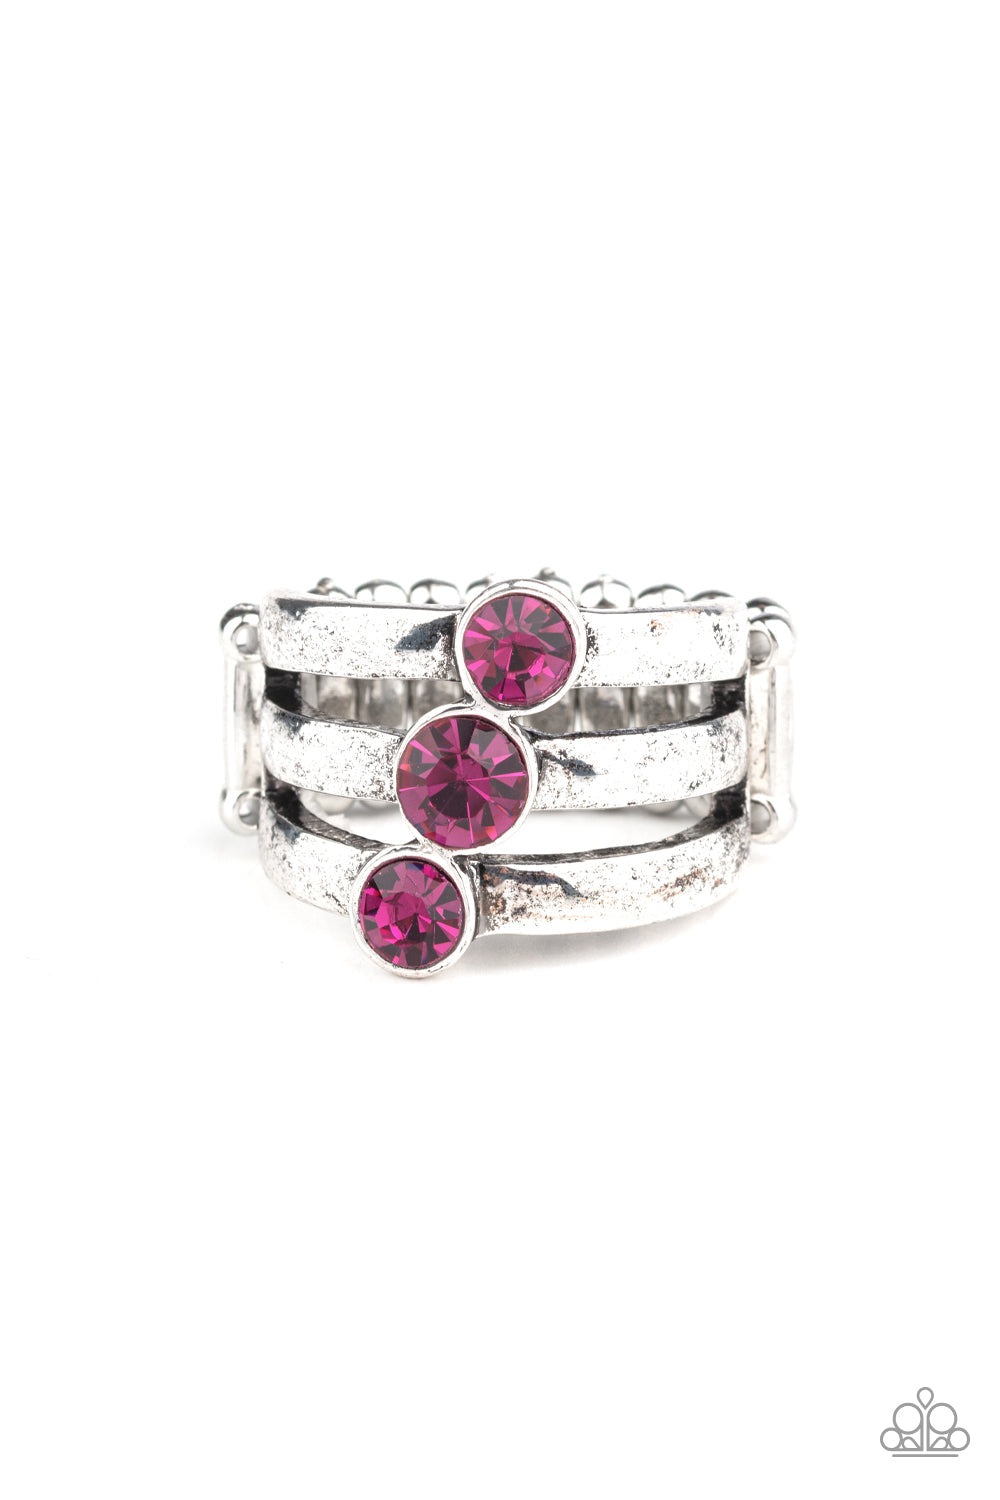 Triple The Twinkle - Pink and Silver Ring - Paparazzi Accessories - A trio of pink rhinestones slant across three stacked silver bands, coalescing into a refined centerpiece. Features a stretchy band for a flexible fit. Sold as one individual ring. Trendy fashion jewelry for everyone.